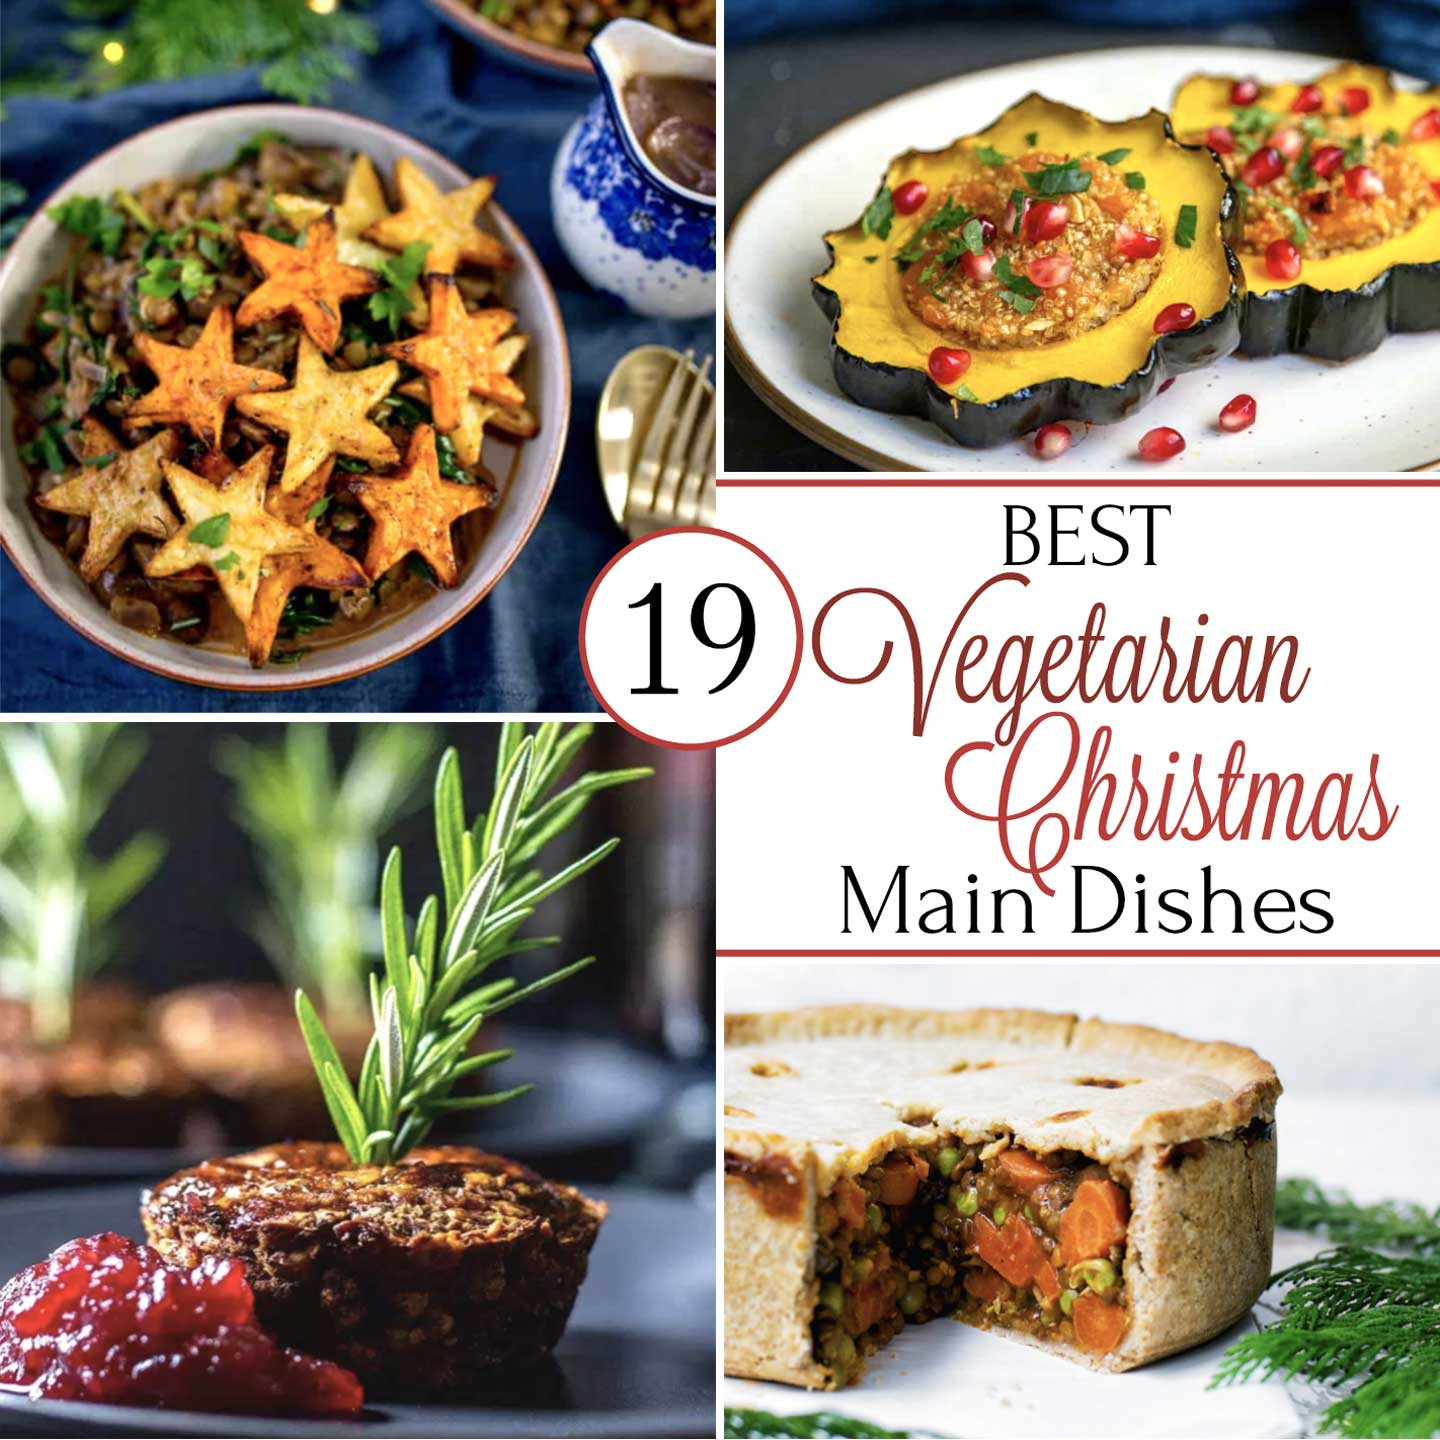 Vegetarian Main Dishes Recipe
 19 Best Christmas Ve arian Main Dish Recipes Two